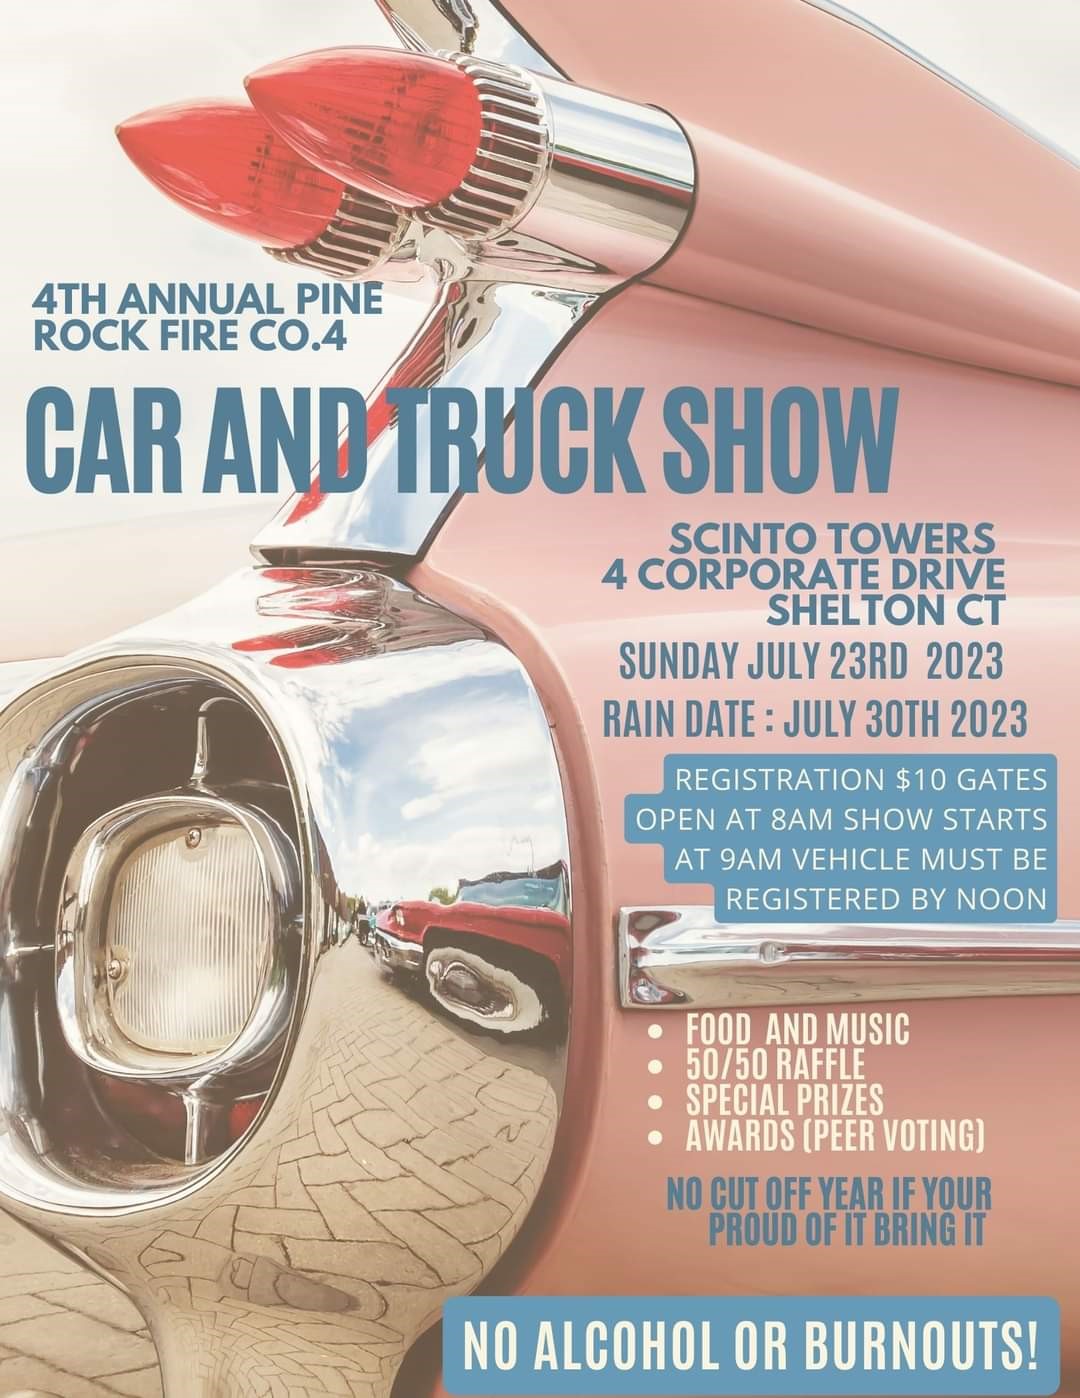 Join us at our Annual Car & Truck Show